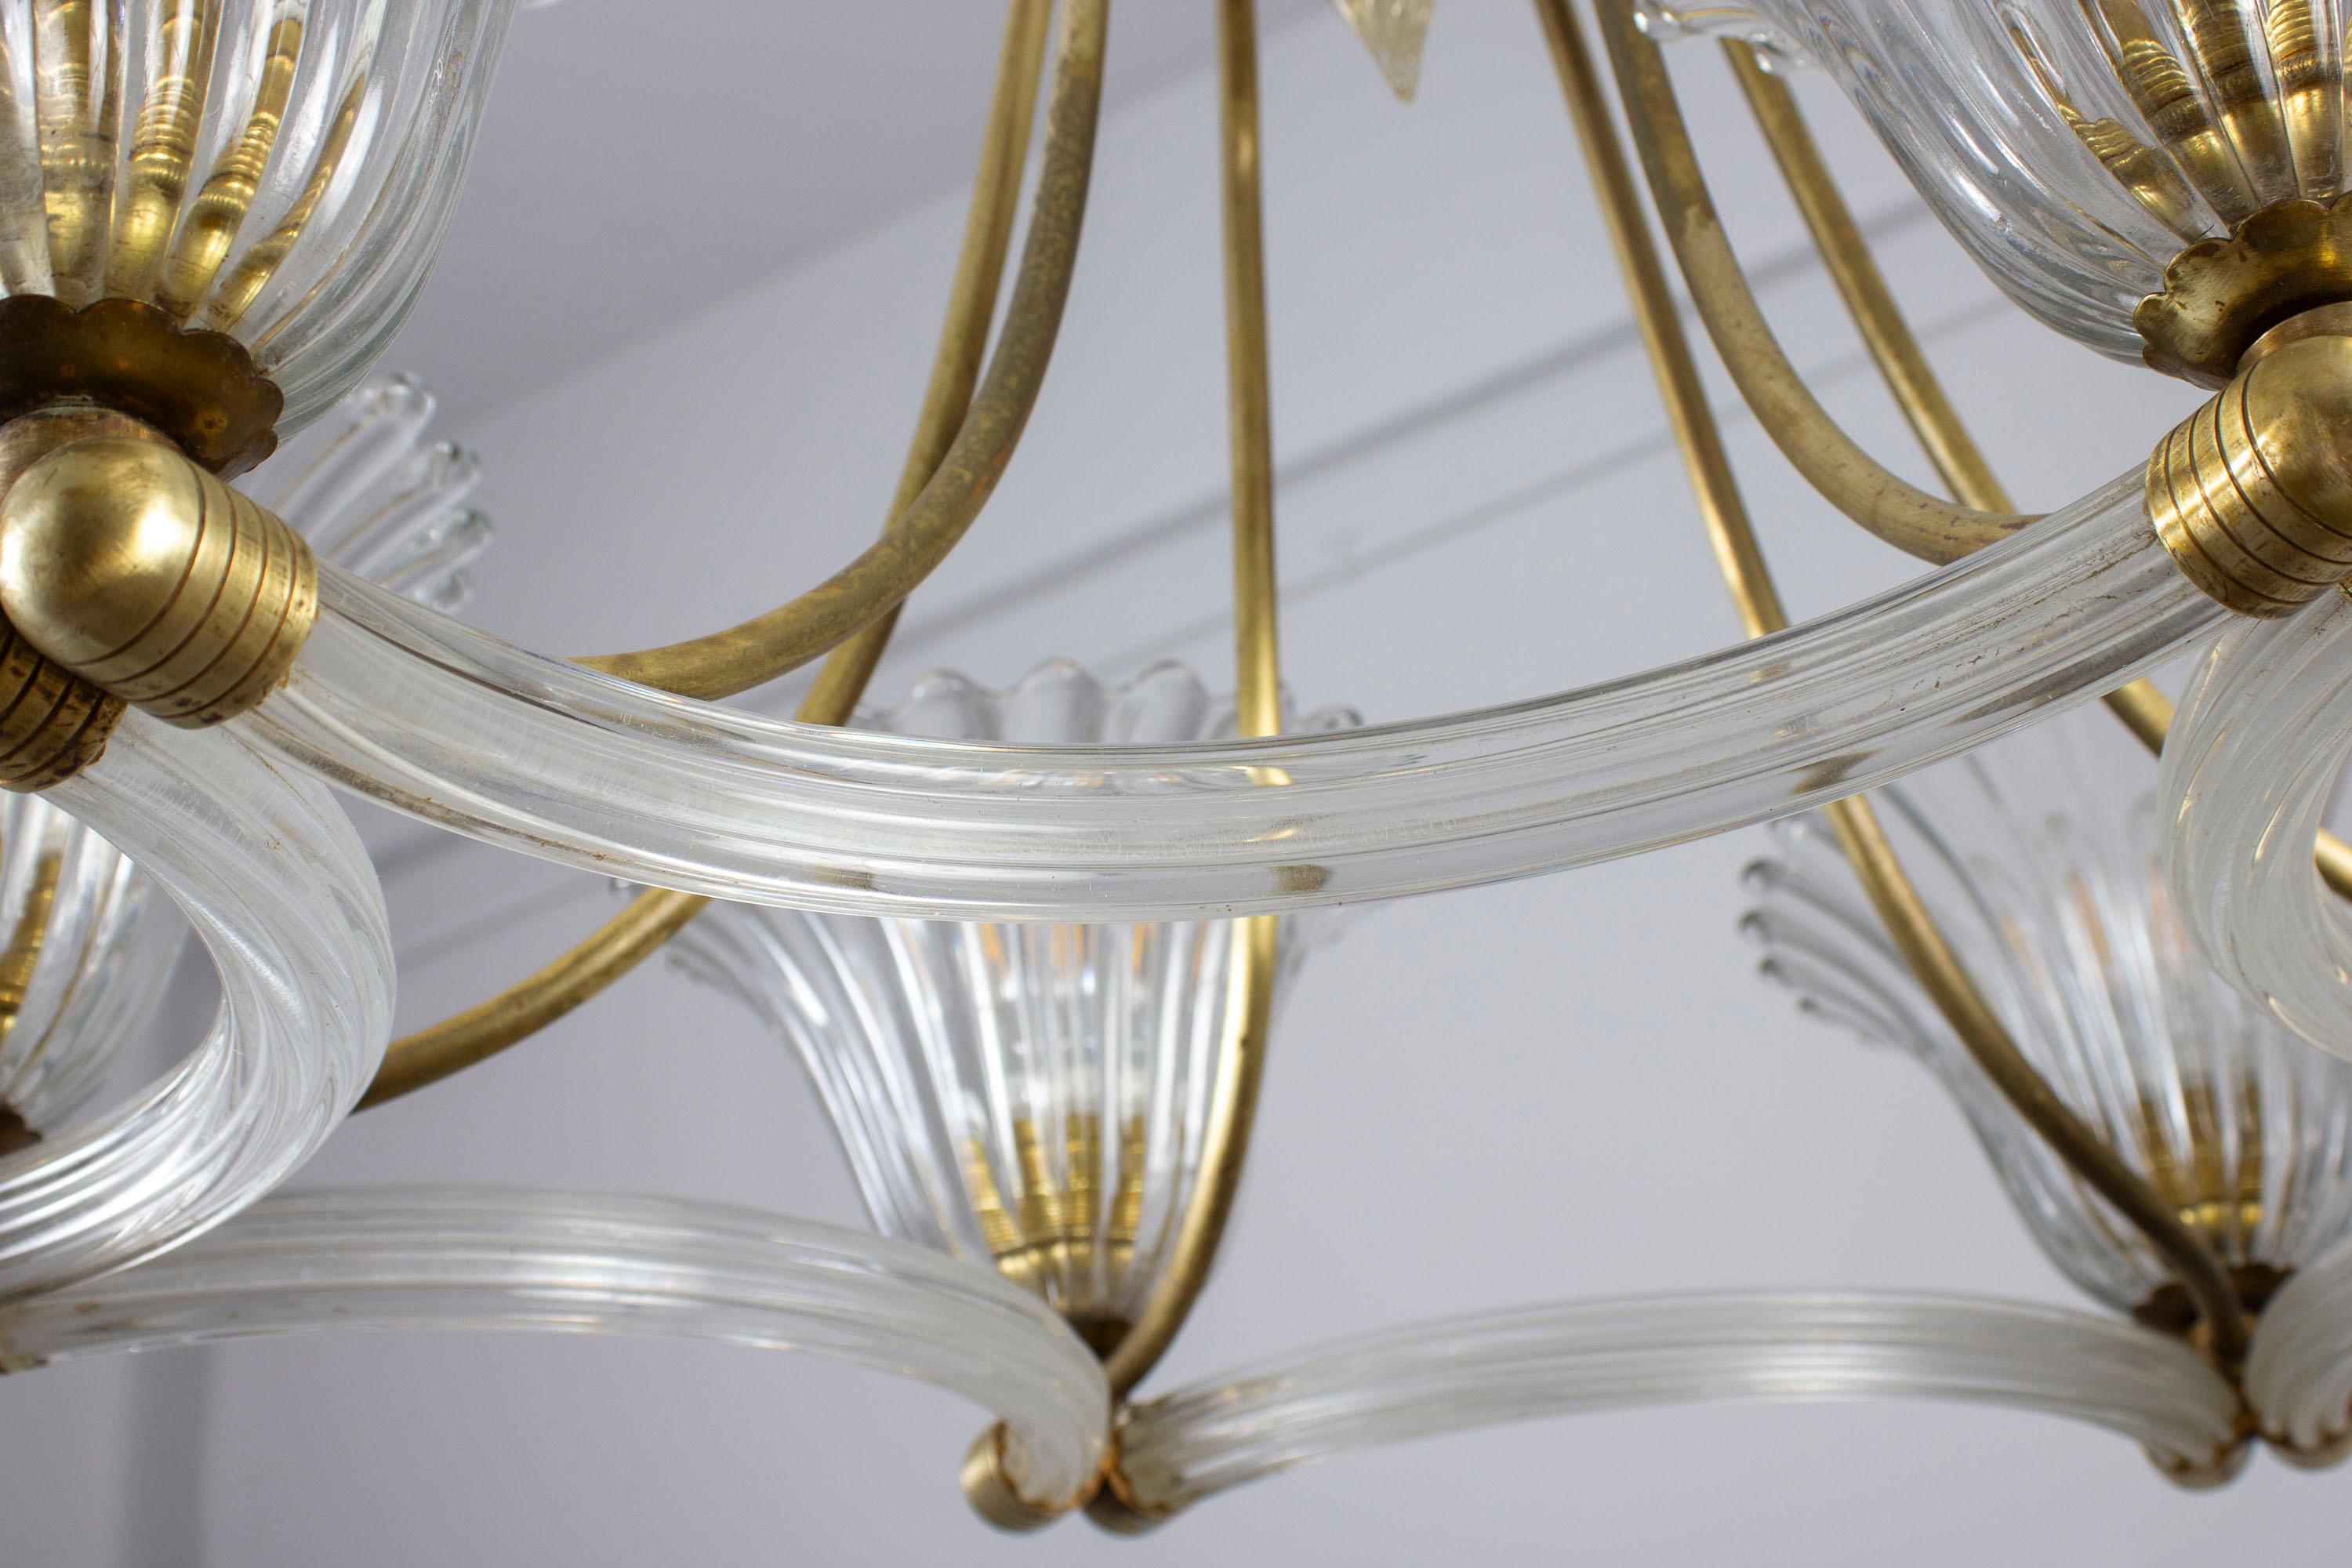  Art Deco Brass Mounted Murano Glass Chandelier by Ercole Barovier 1940 For Sale 3